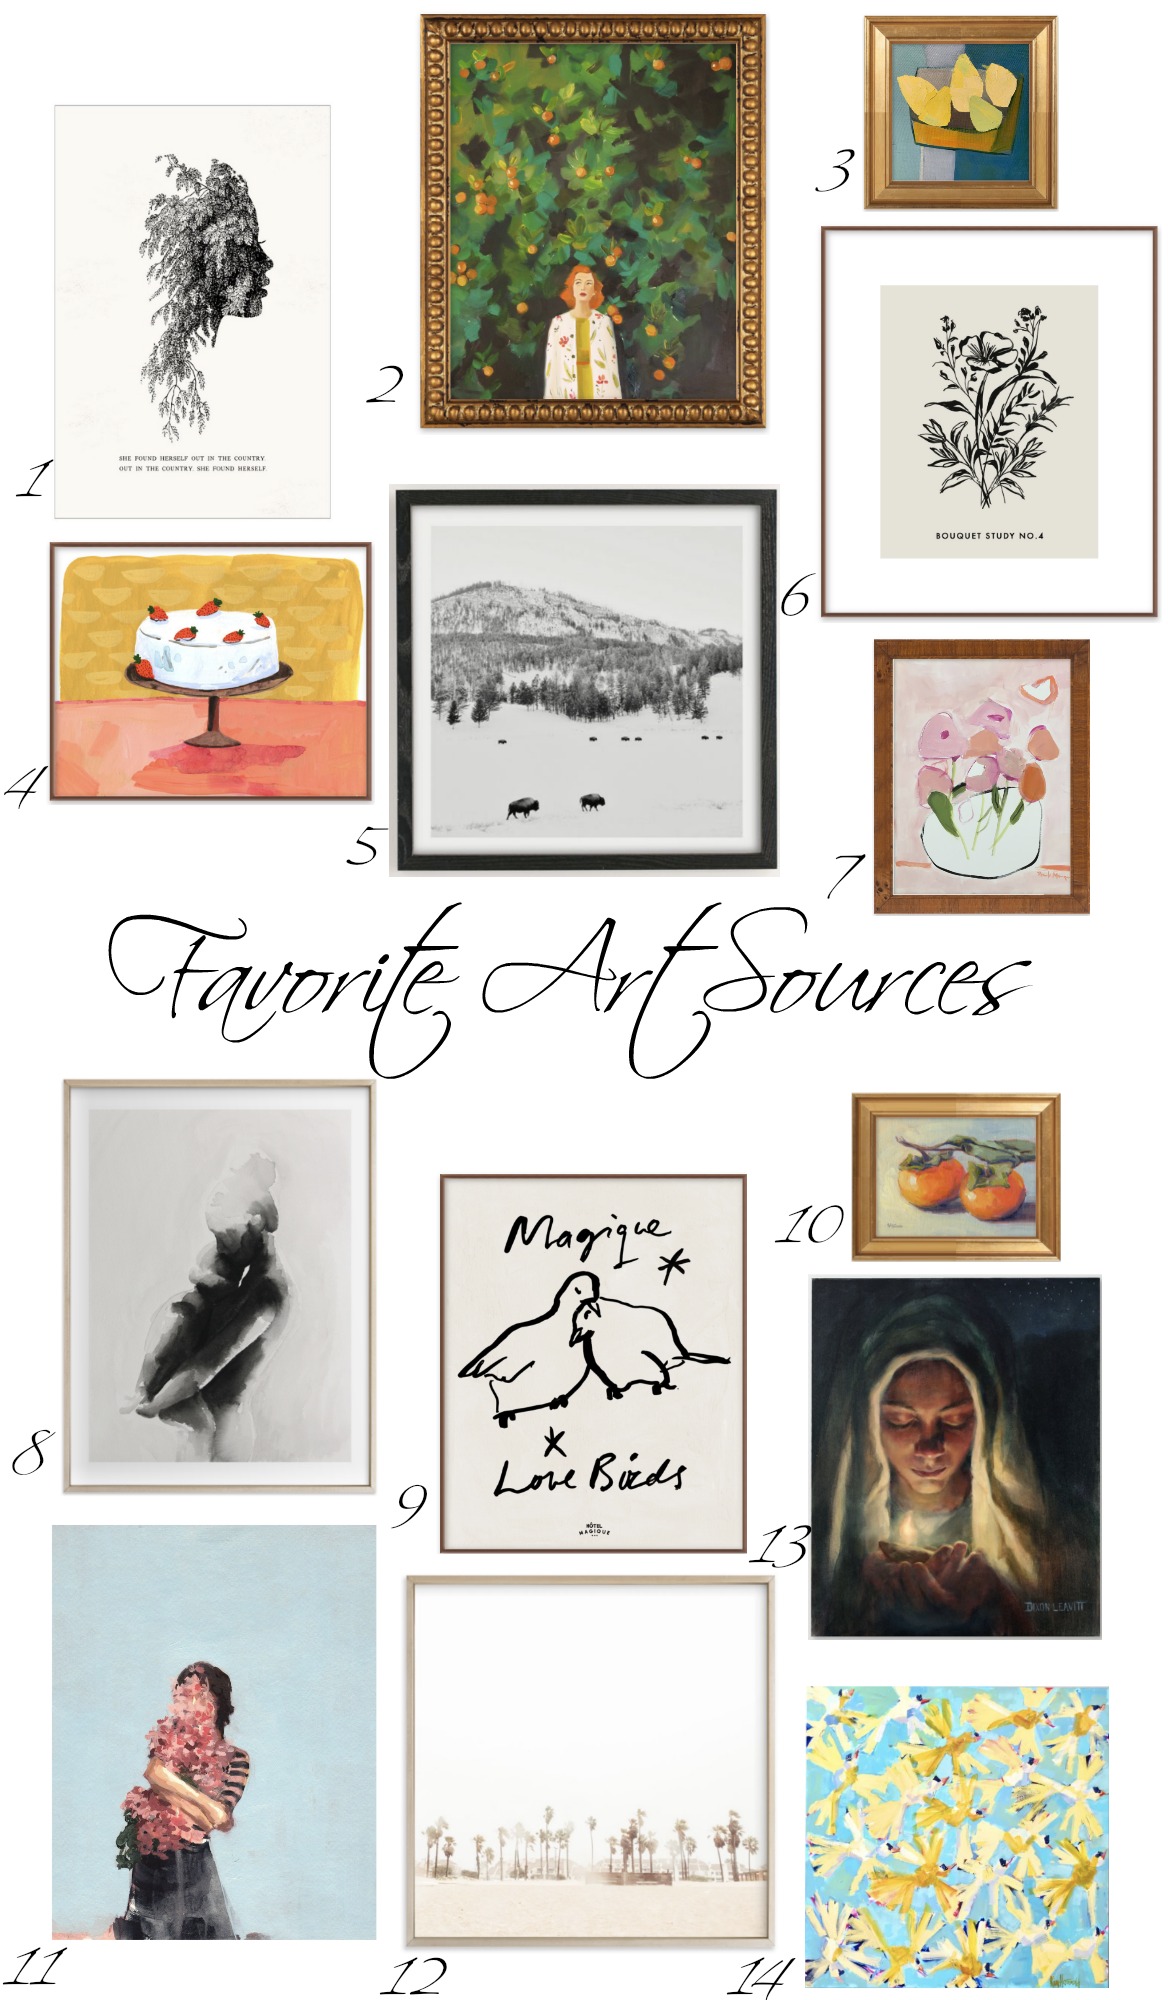 3 Top Tips for Getting Wall Art Right & Favorites Art Sources